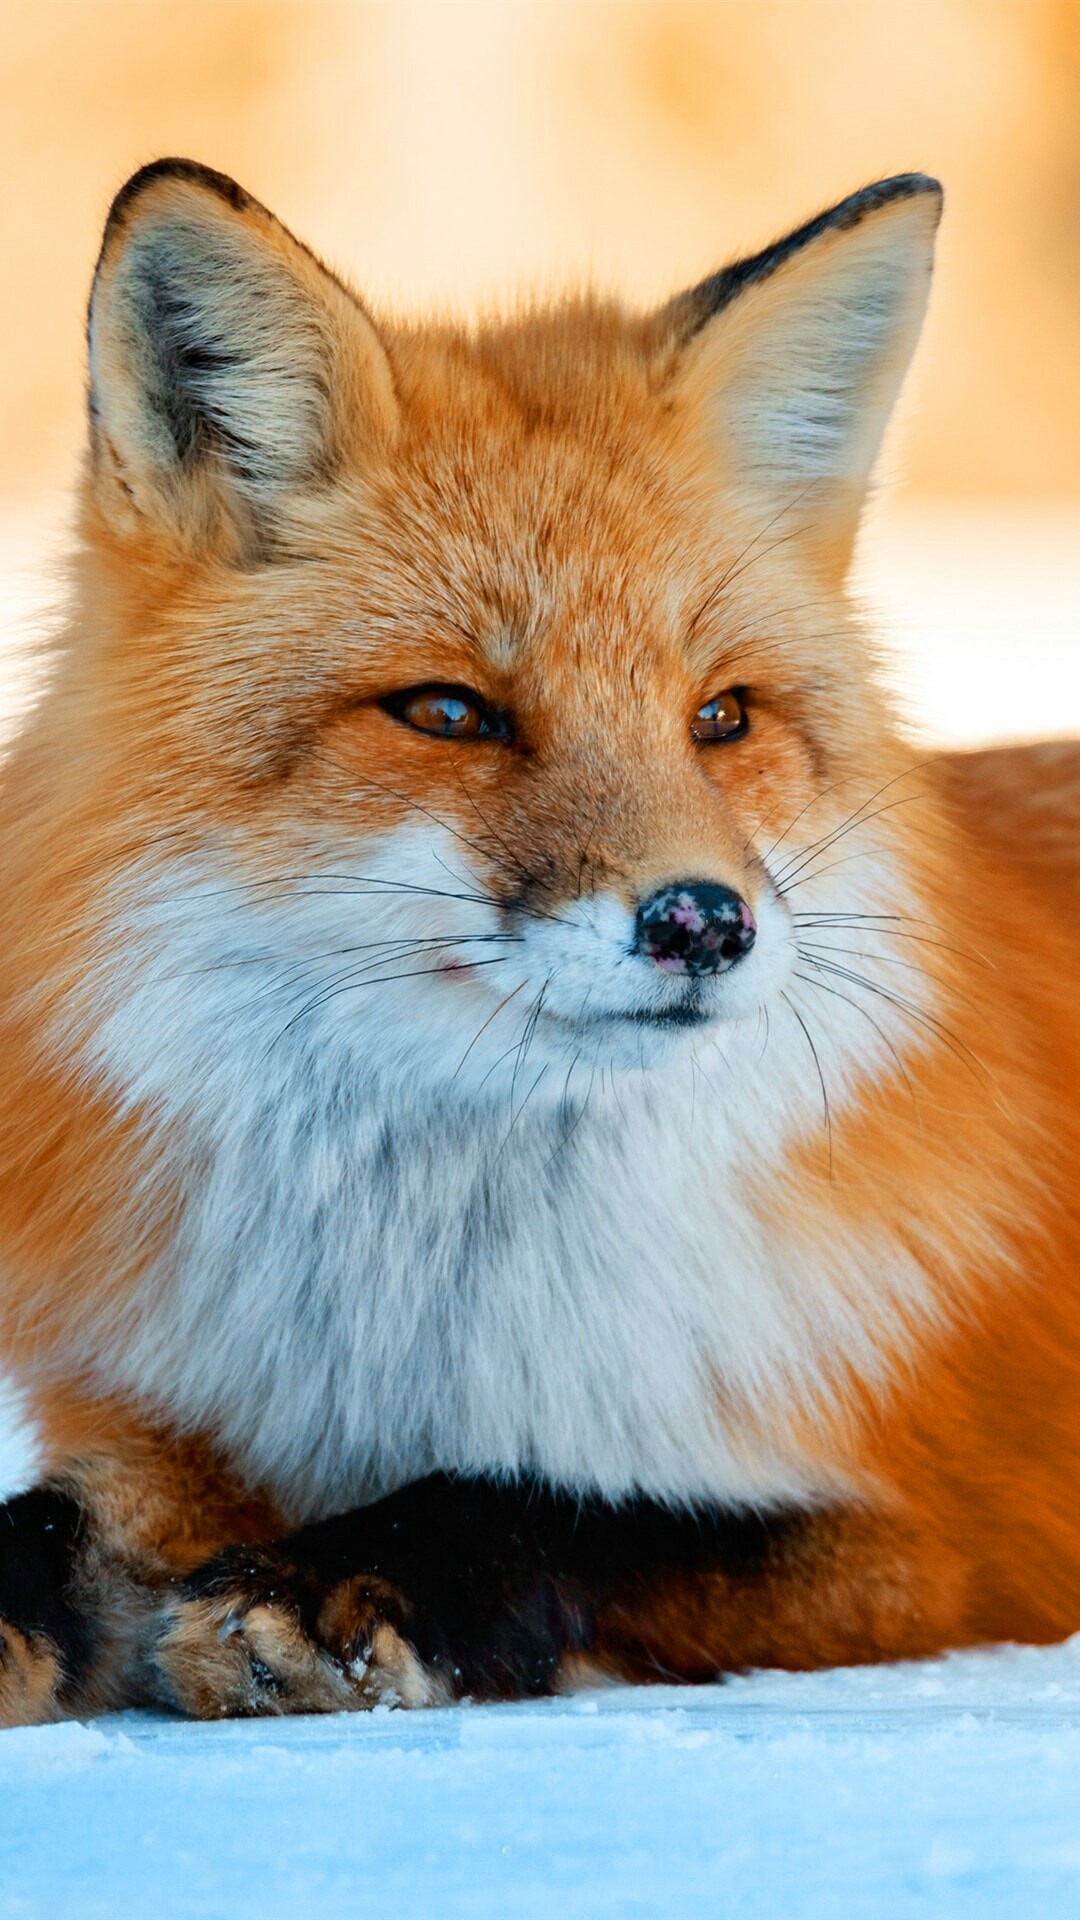 Fox: The distinctive red-brown fur and long bushy tail. 1080x1920 Full HD Background.